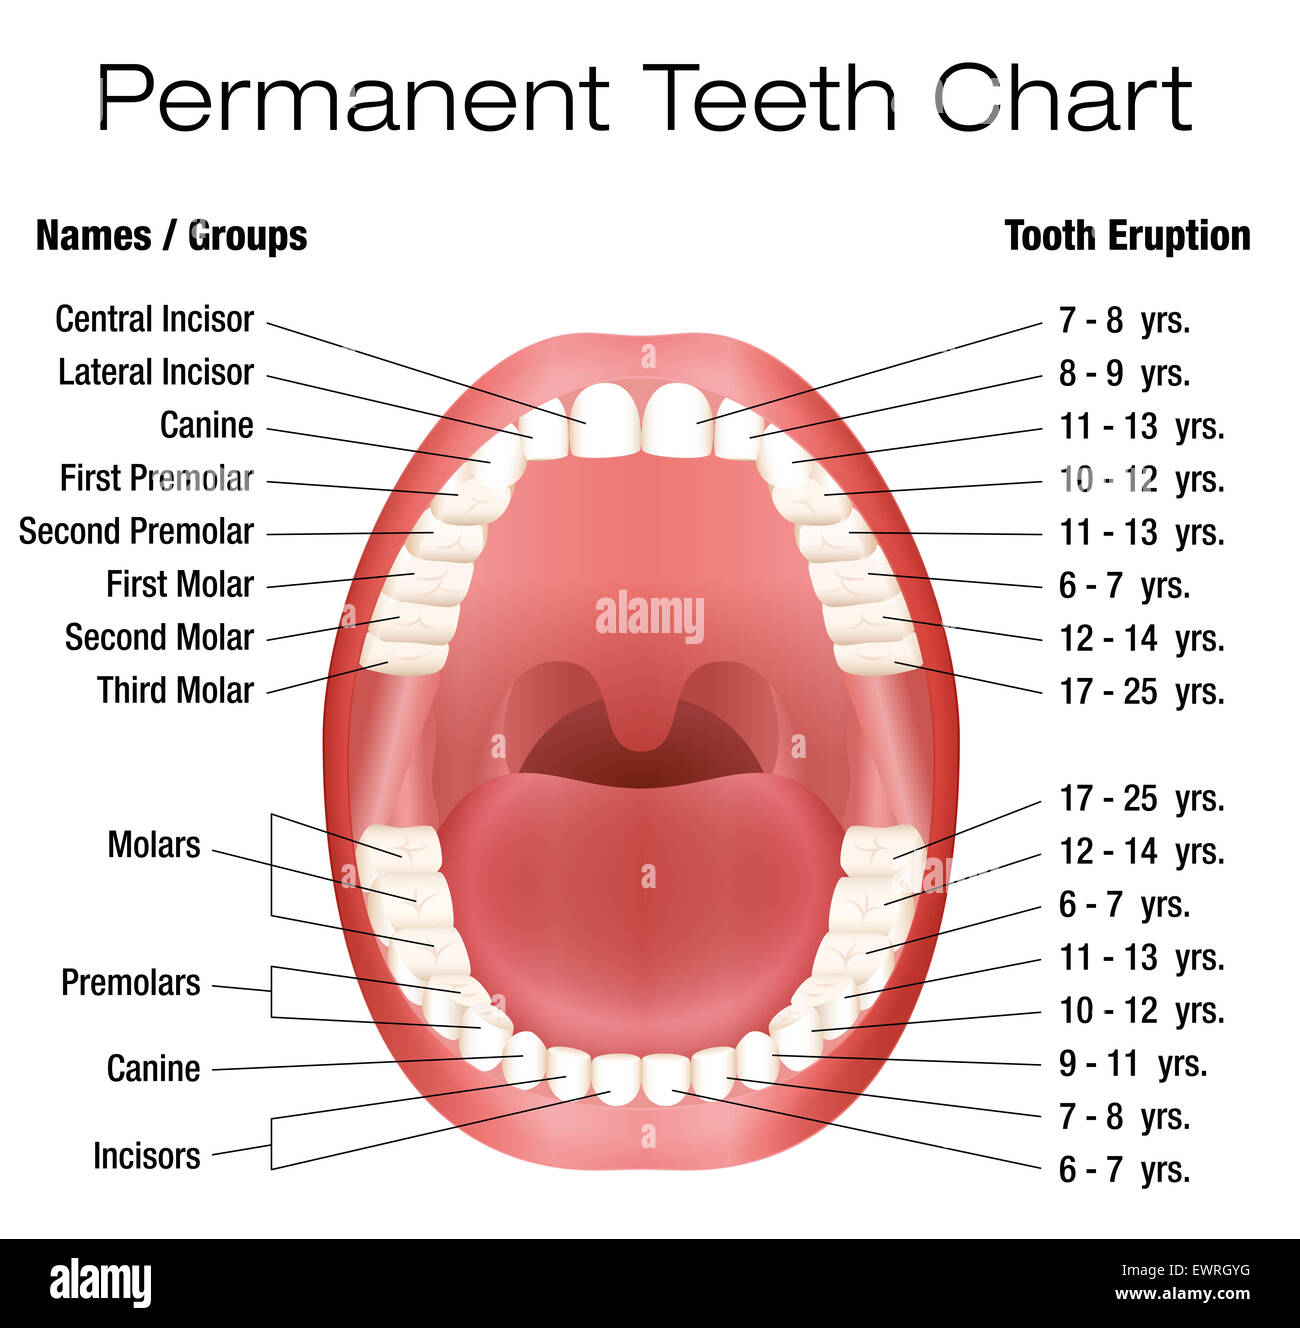 Teeth names and permanent teeth eruption chart with accurate notation of the different teeth, groups and the year of eruption. Stock Photo